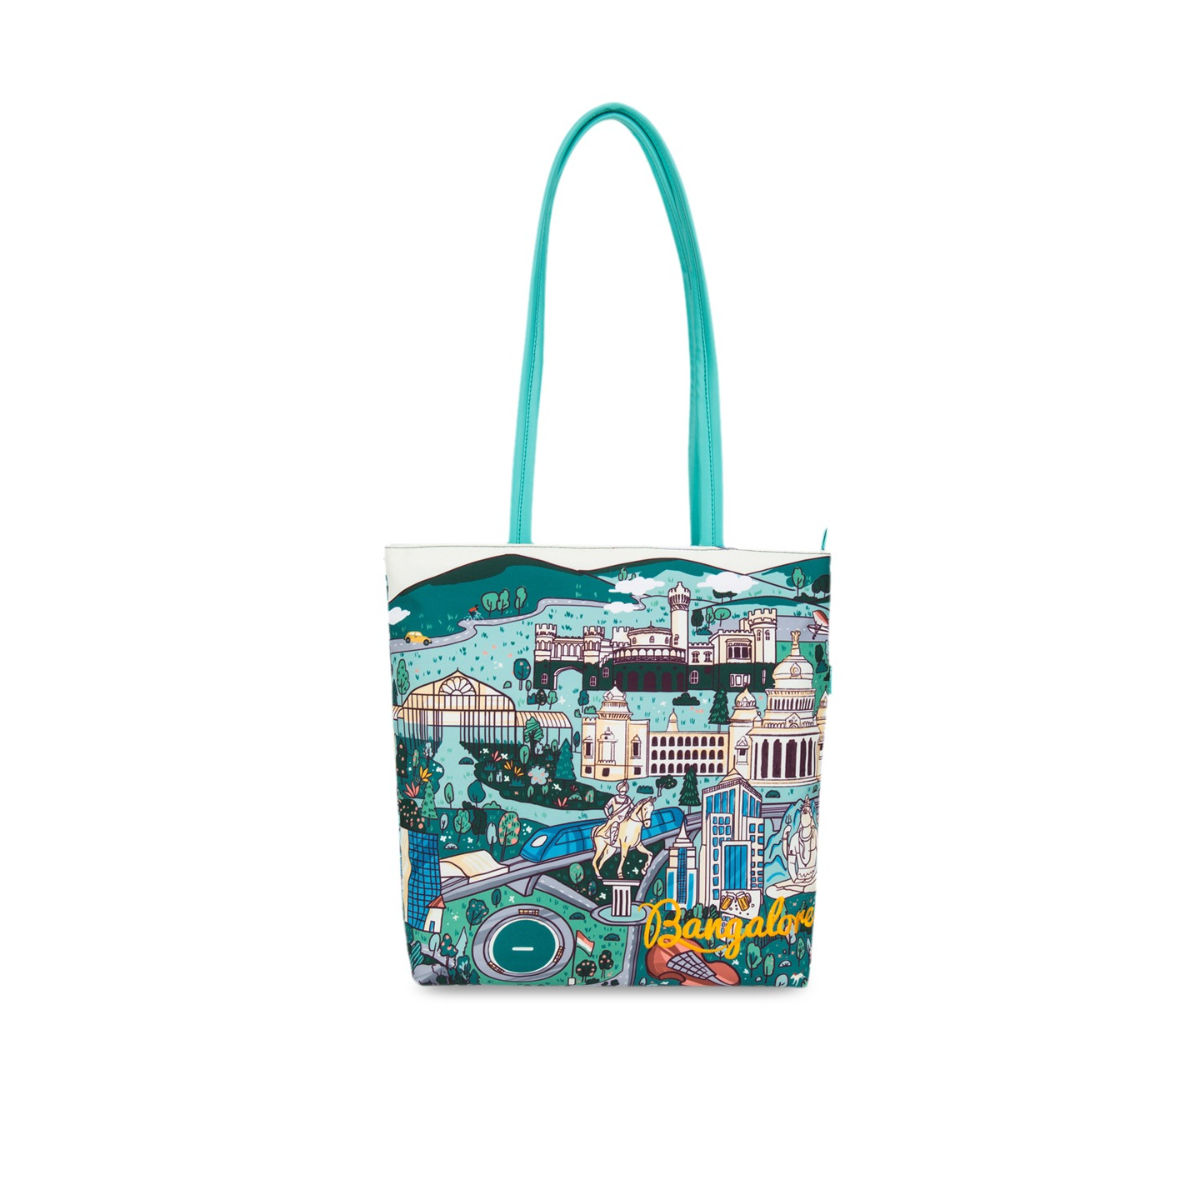 Cloth Bags Dealers in Bangalore  cloth bags Suppliers  Manufacturer List   IndianYellowPages